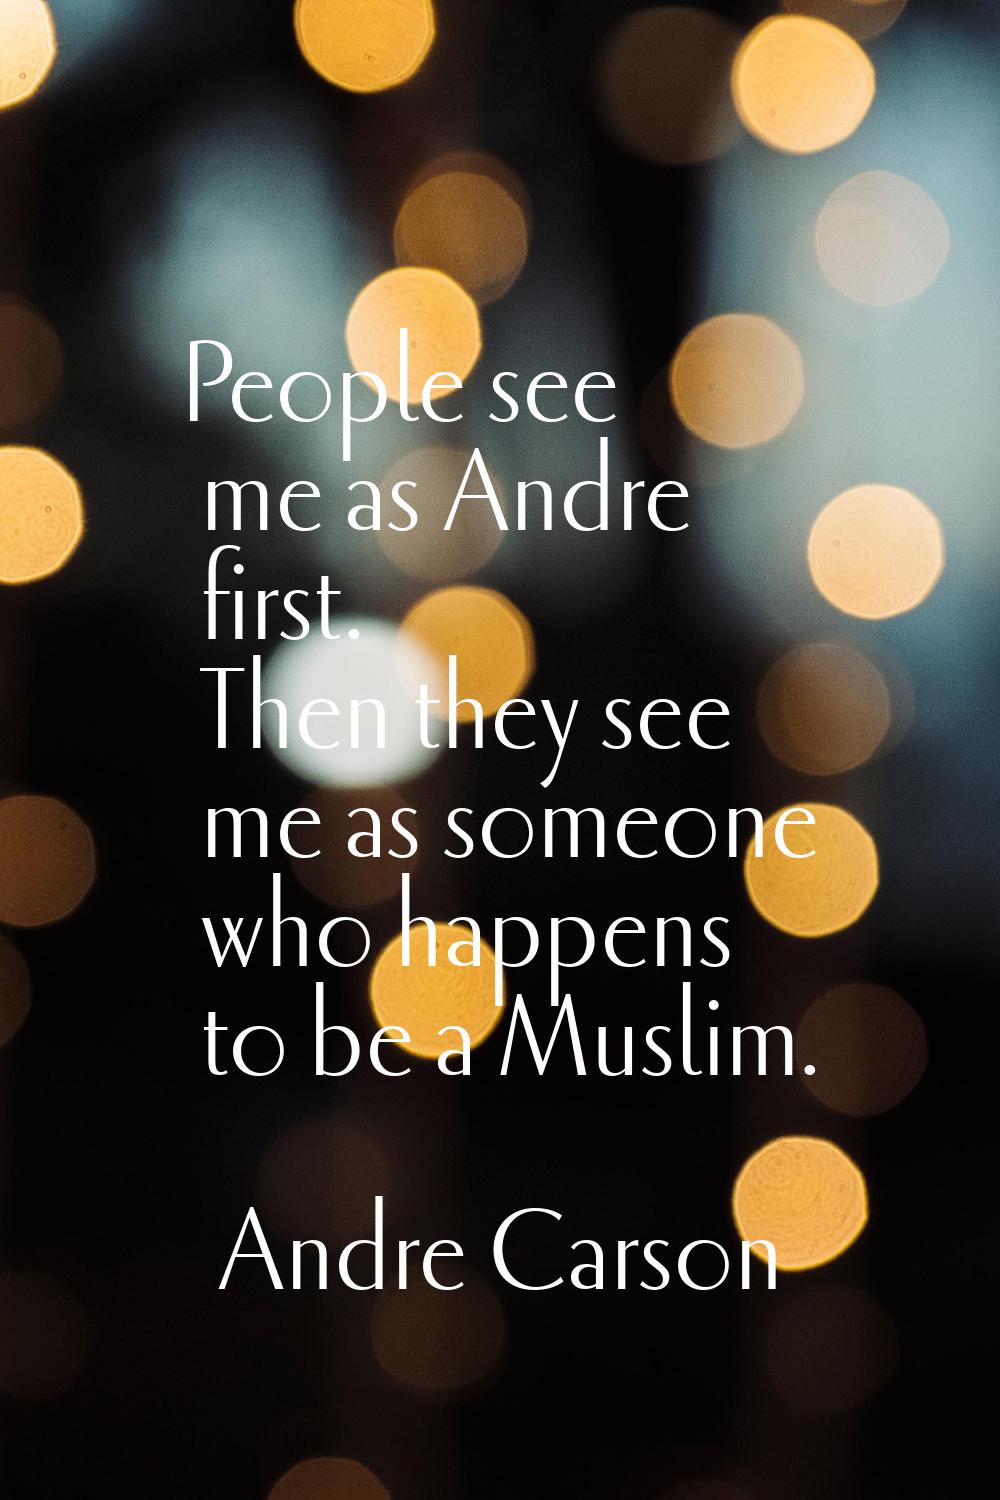 People see me as Andre first. Then they see me as someone who happens to be a Muslim.